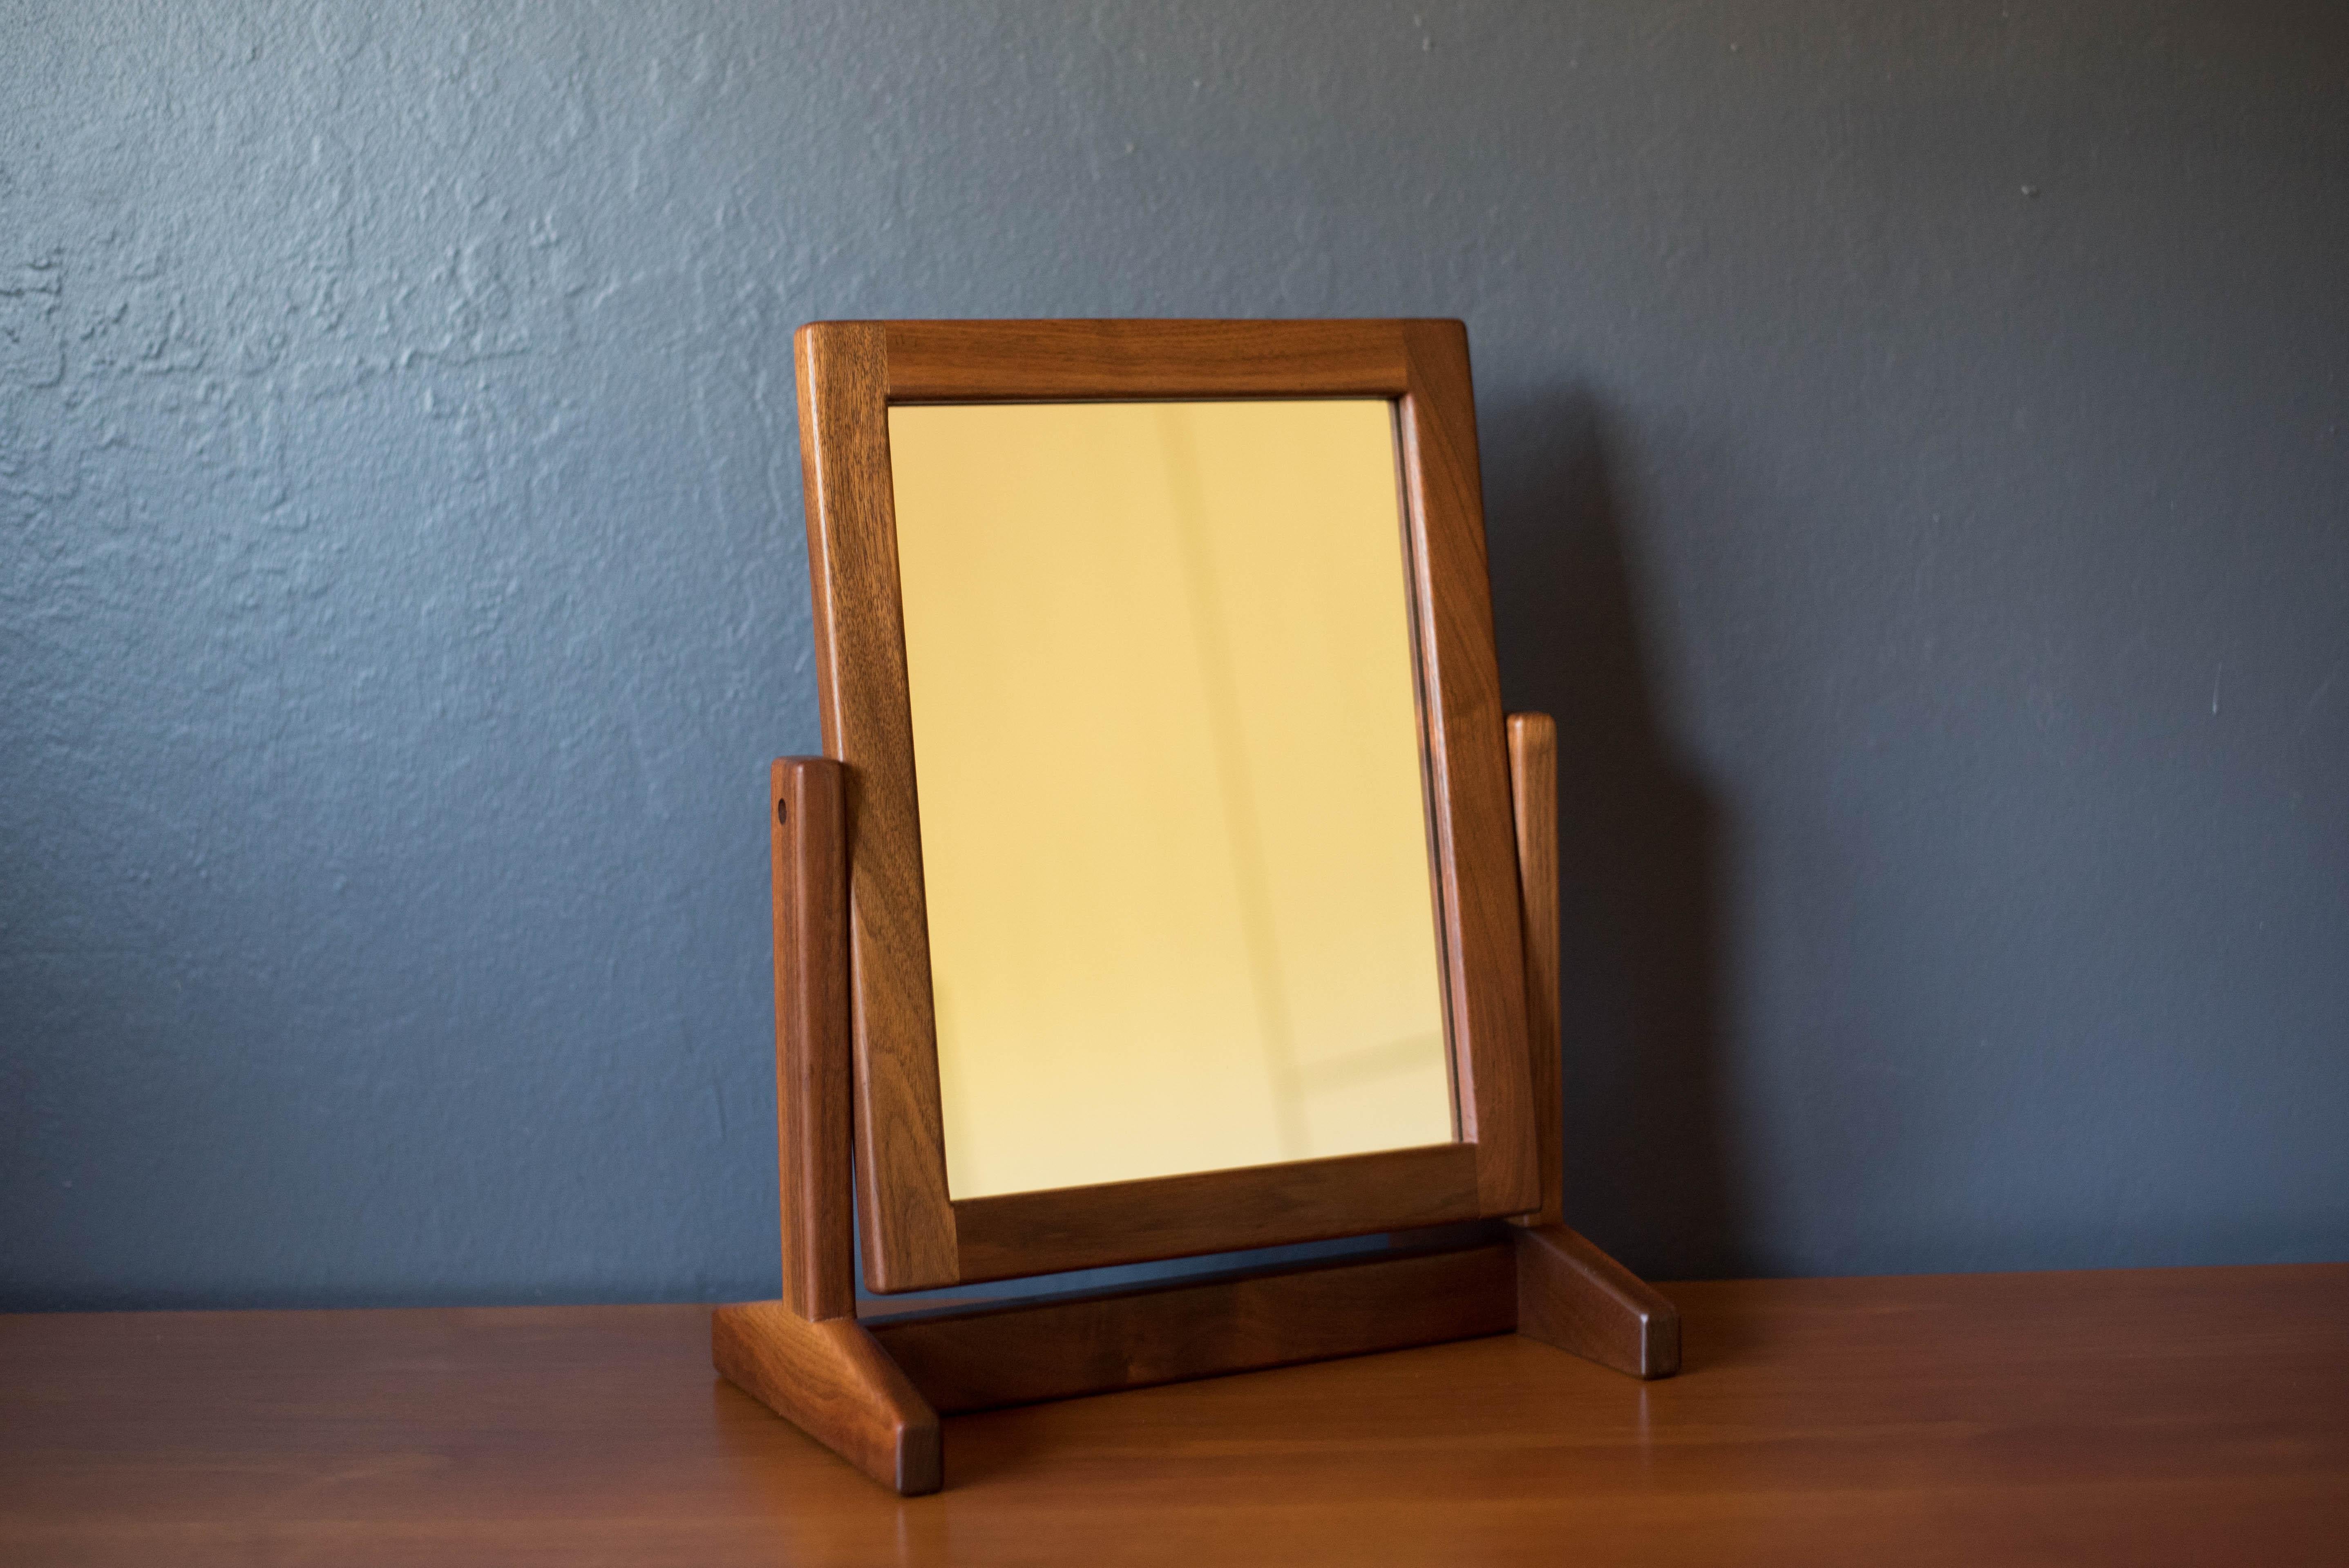 Vintage studio makeup vanity table mirror with stand circa 1960's. This unique pivoting accent mirror is framed in solid walnut wood and is perfect for everyday use in the bathroom, dressing room, or accented on a bedroom dresser. 




Offered by